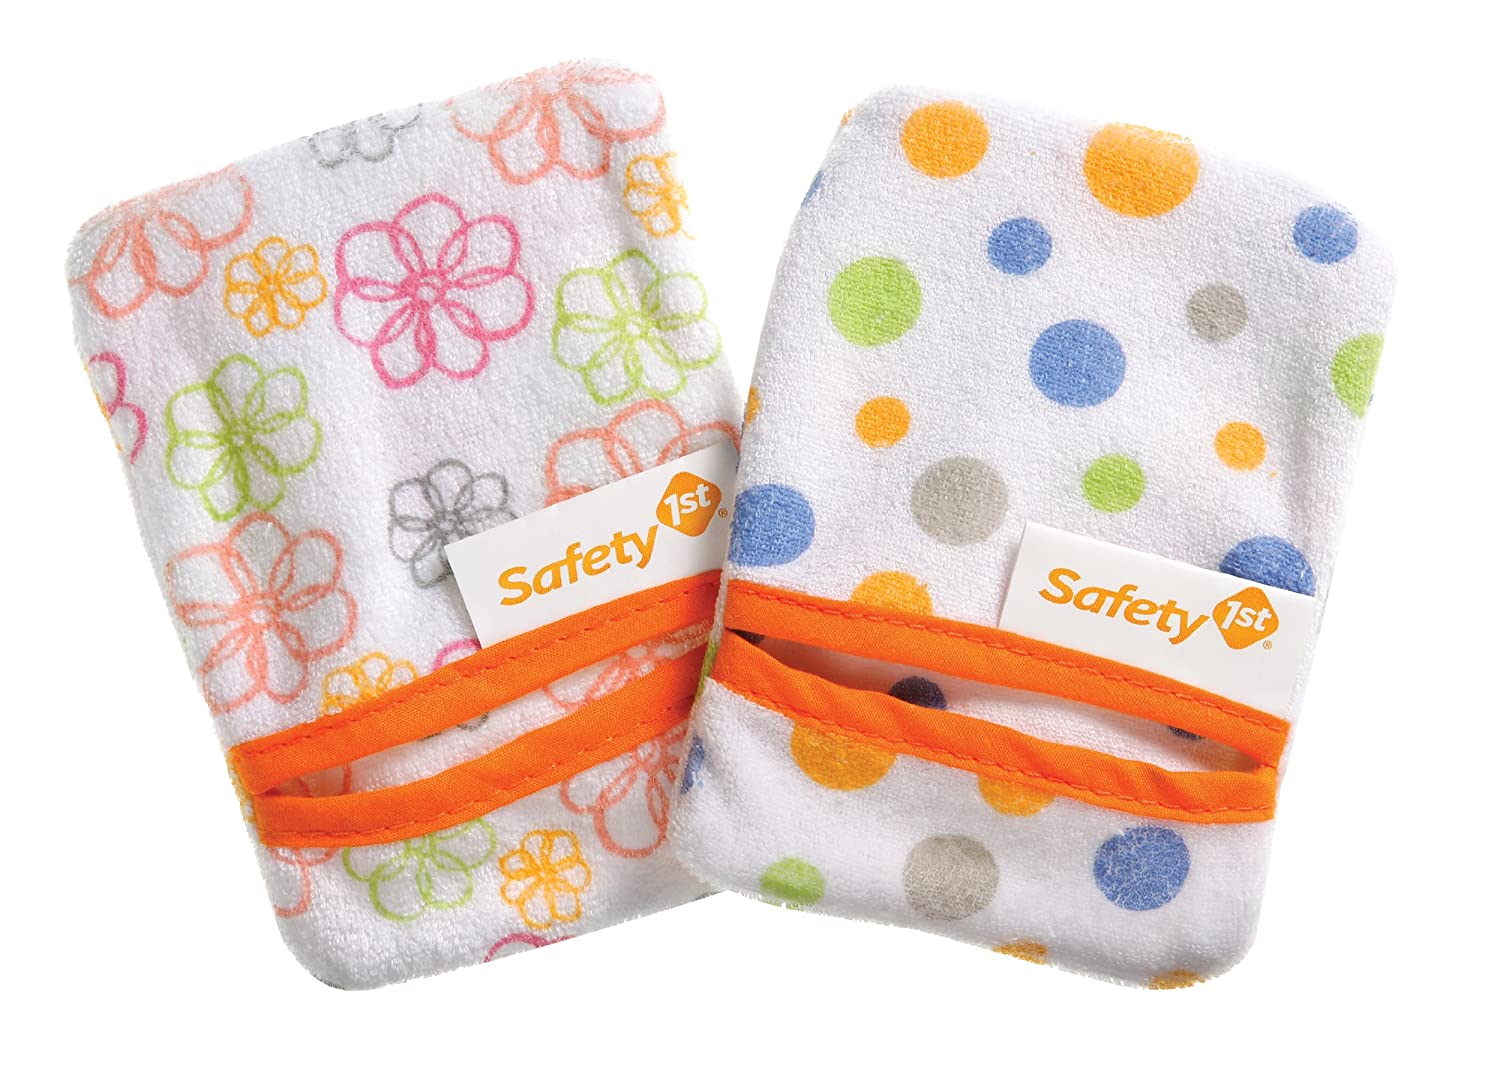 Safety 1st Hot And Cold Pack Helping Hand: Comfortable fabric pocket and keep your baby's hands cozy or cool - 49552